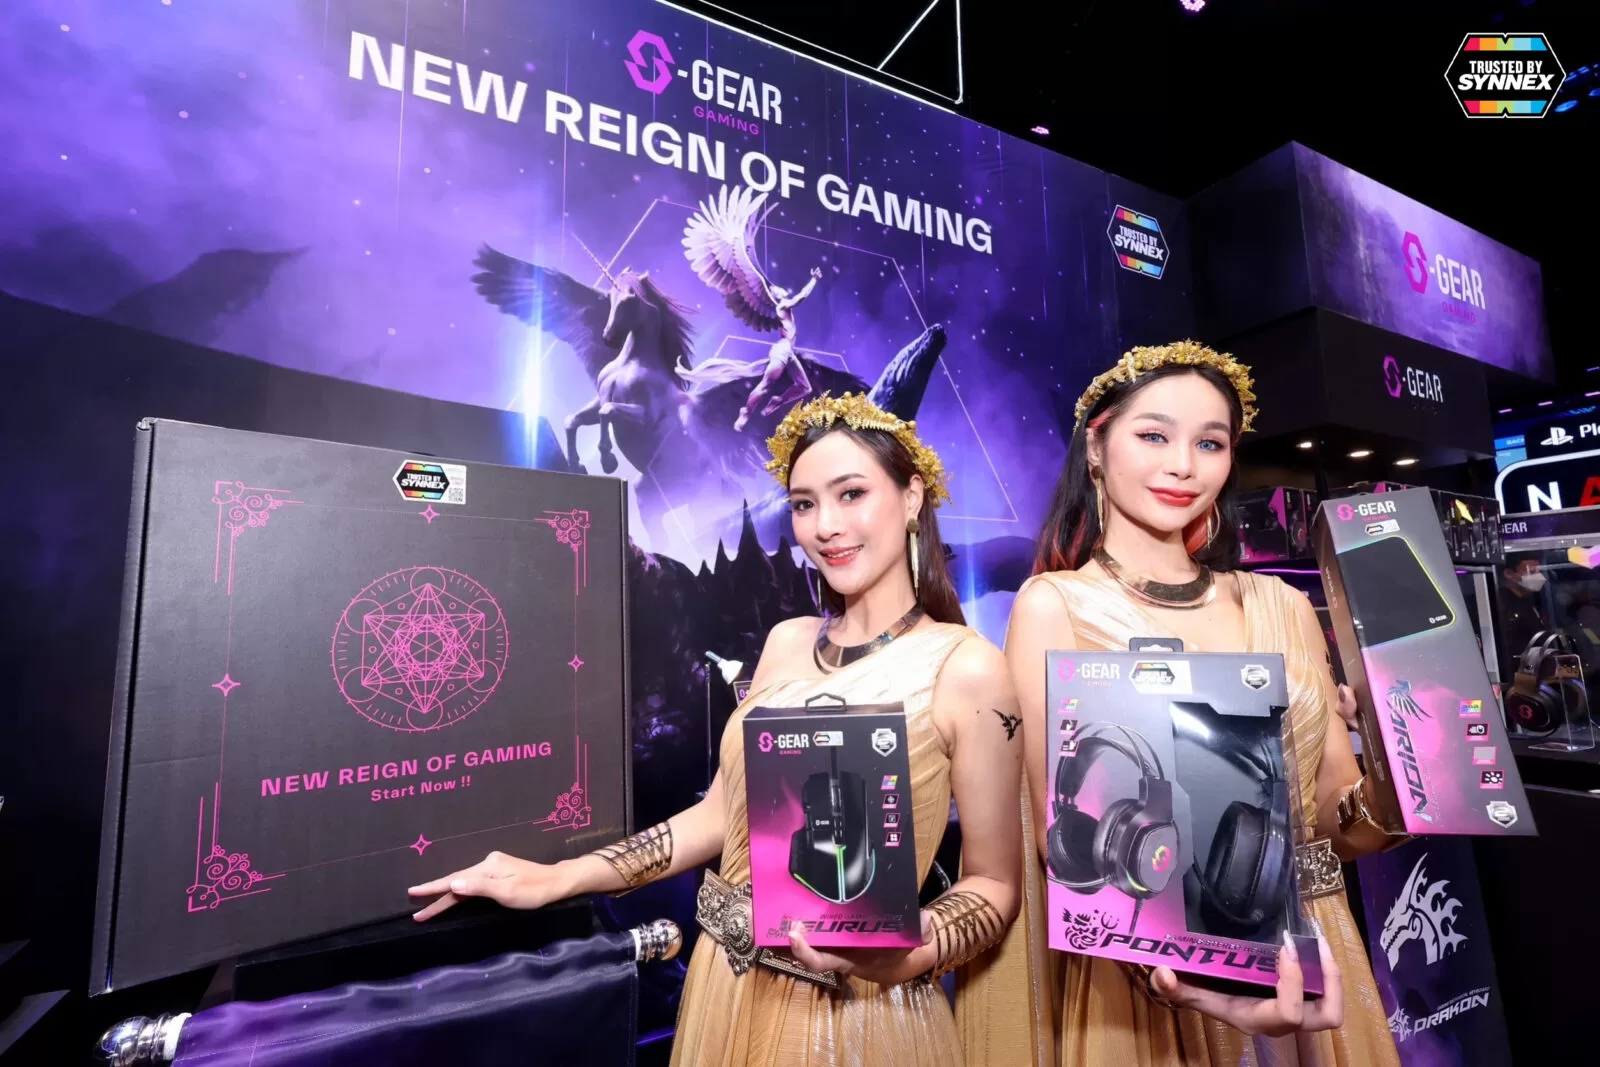 9.S GEAR Gaming | S-GEAR | 